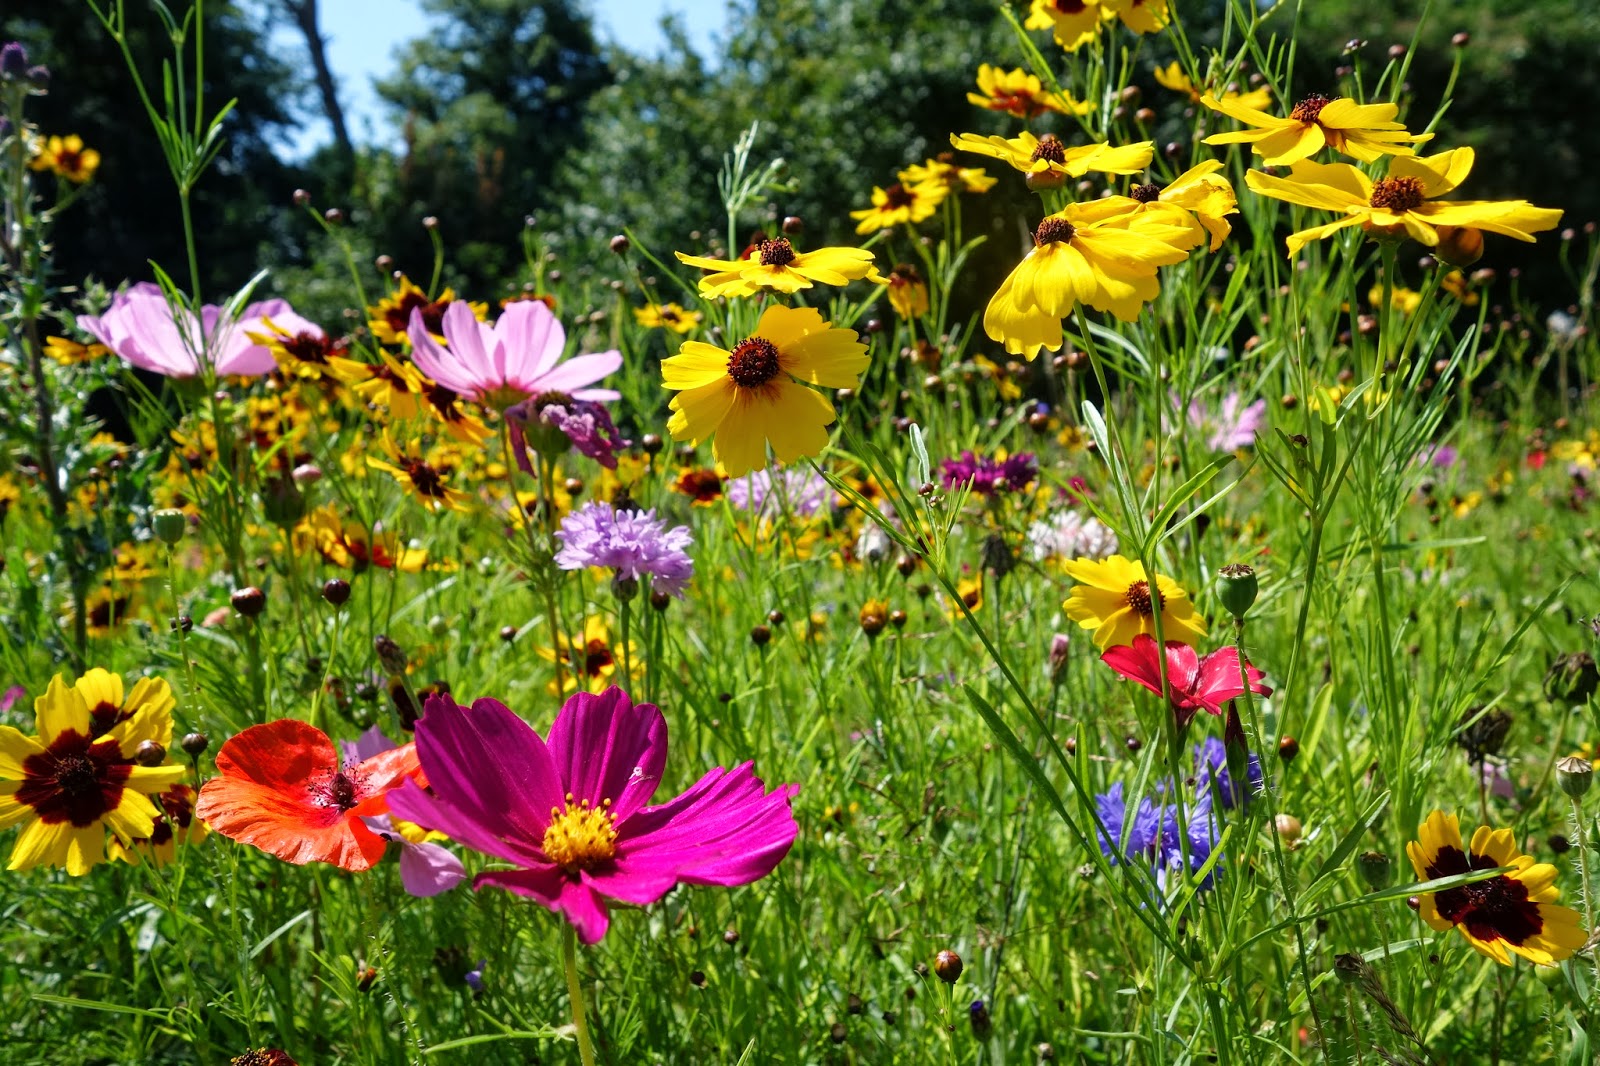 Urban Pollinators: What plants are flowering in our annual meadows?